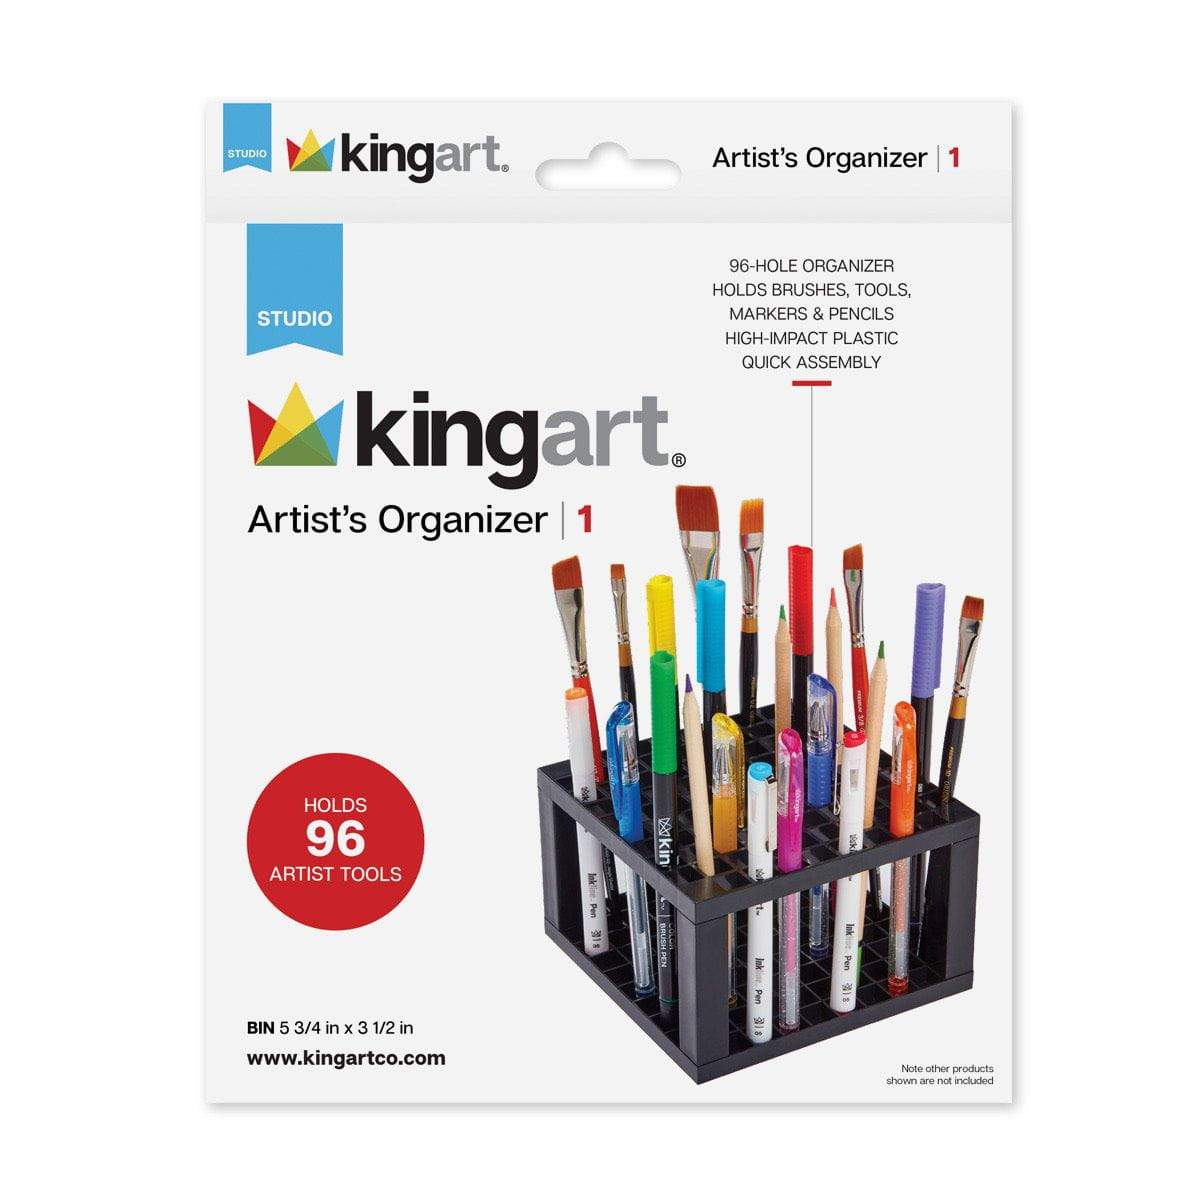 KINGART® PRO Real Brush Watercolor Pens, Set of 12 Unique Colors for  Creating Illustrations, Calligraphy, and Watercolor Effects